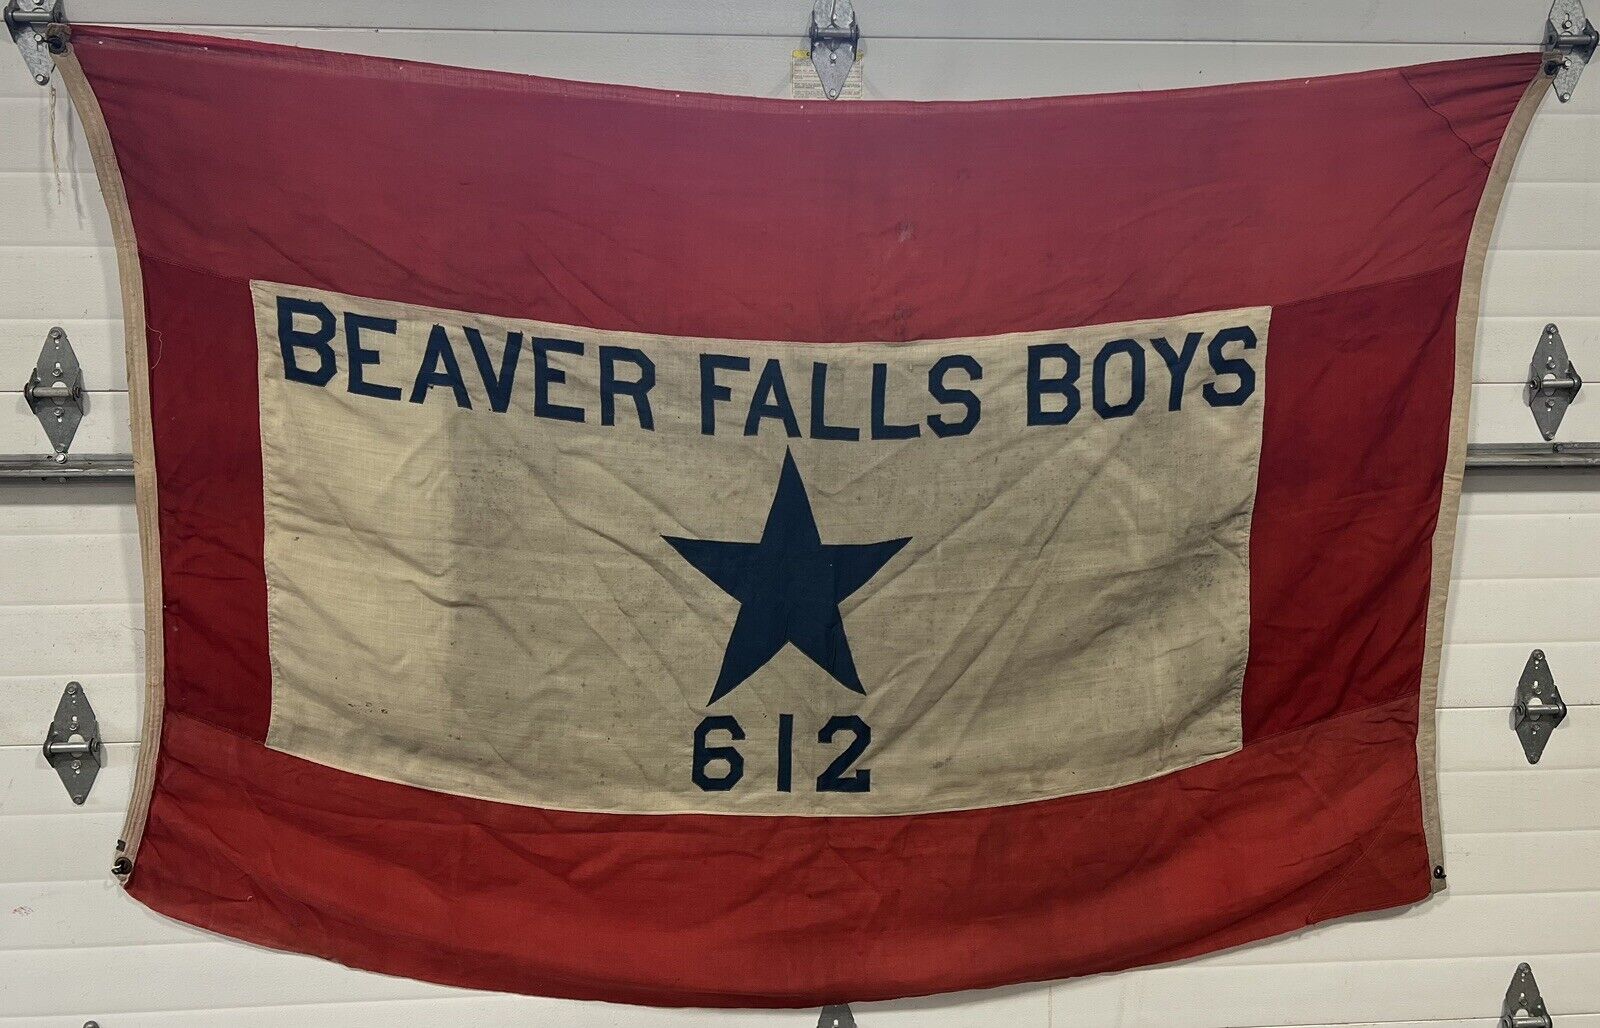  Vintage Boy Scouts Flag Of The Beaver Falls Boys #612